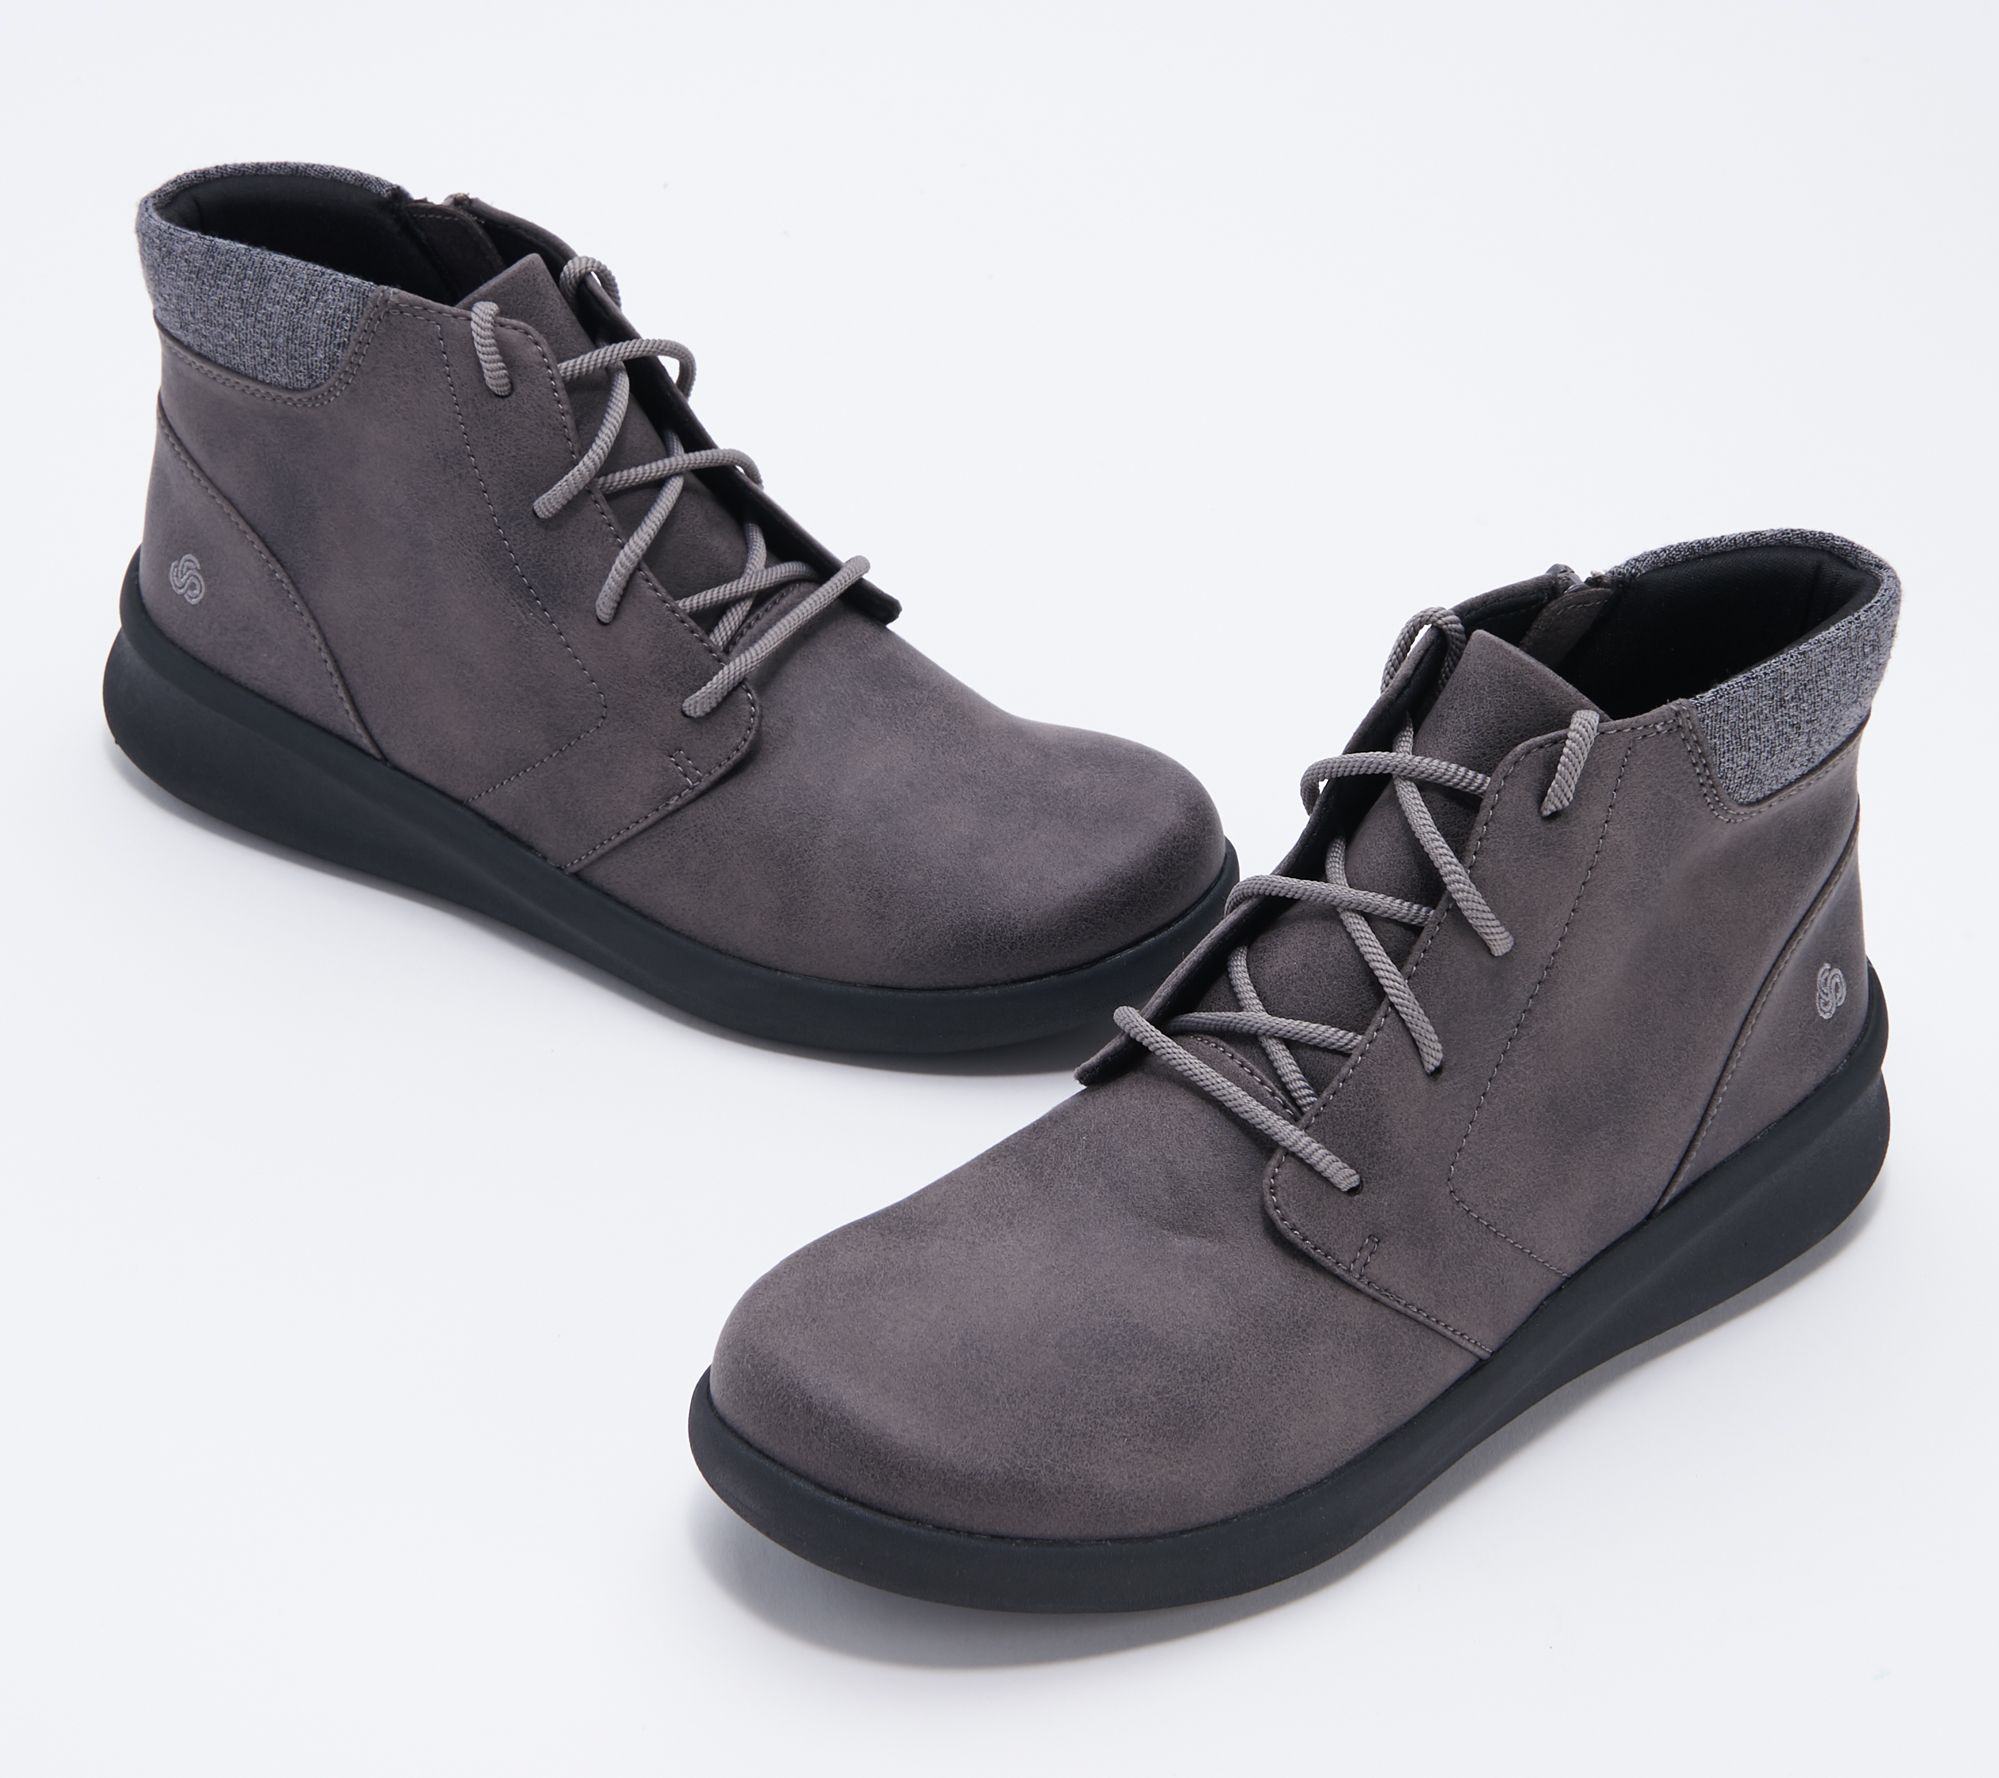 clarks gray ankle boots